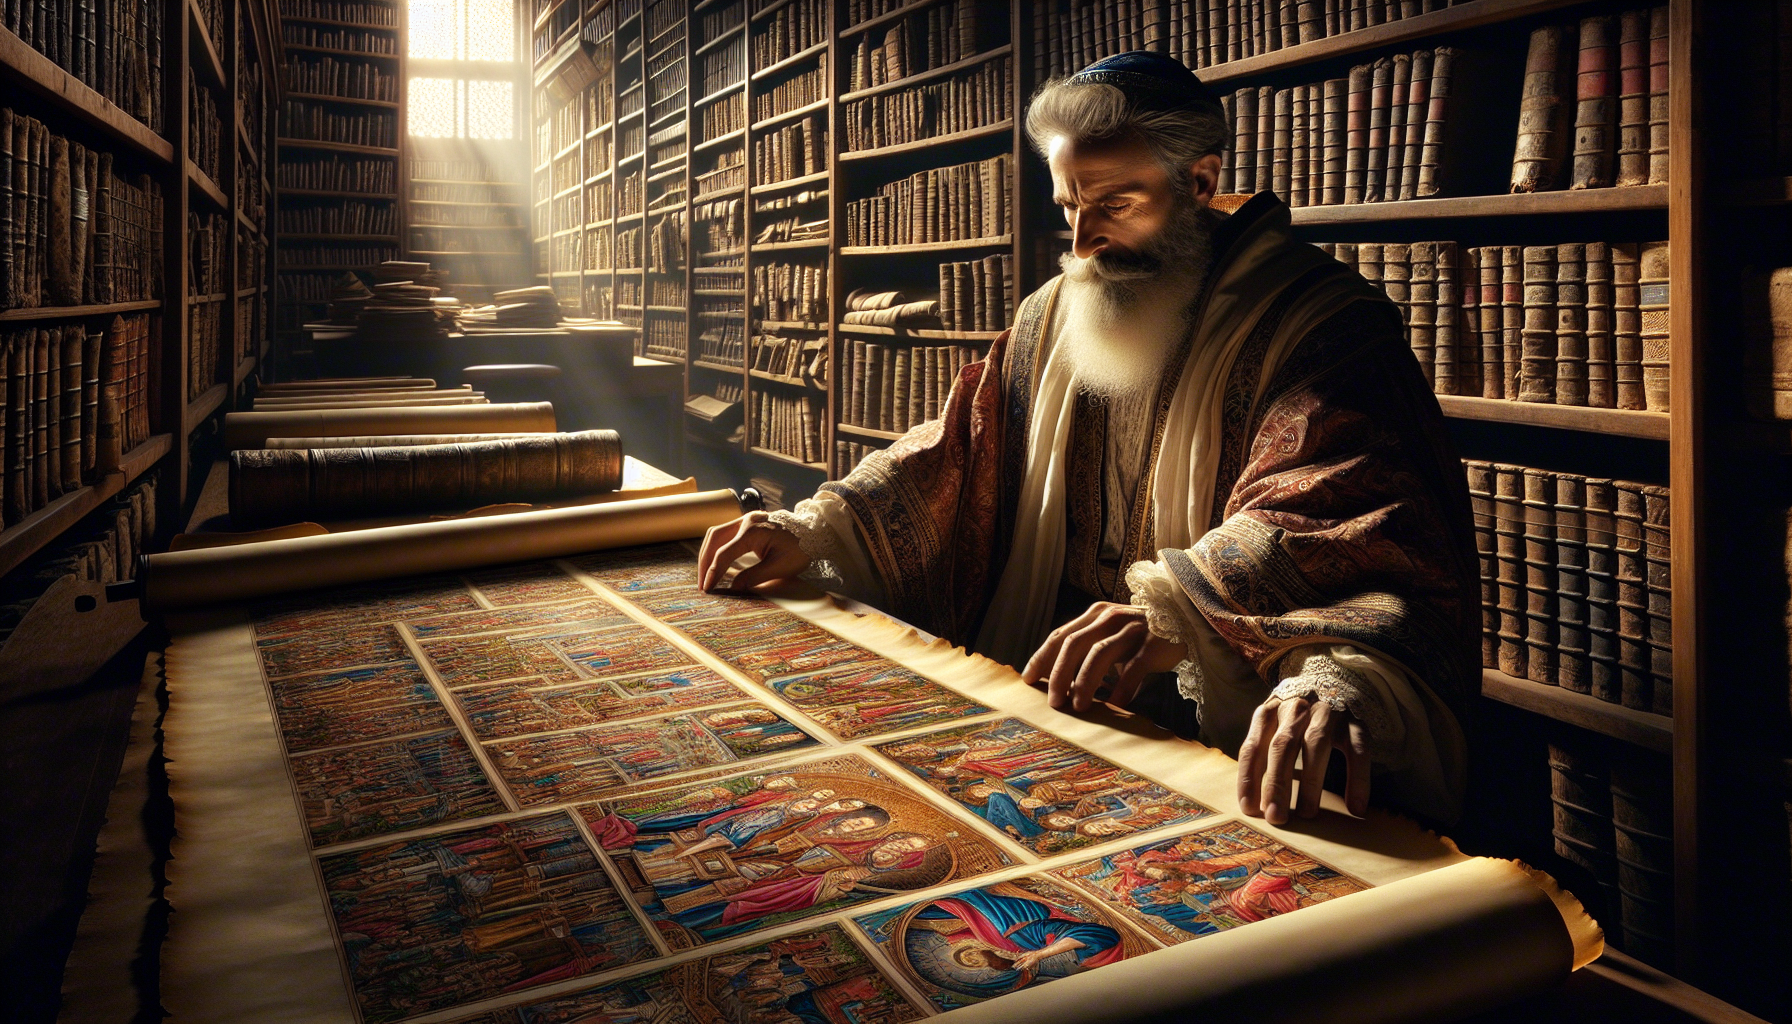 An ancient, sunlit library with rows of timeworn books and scrolls, a middle-aged man with a gentle face and white beard, dressed in traditional biblical attire, intently studying a large, open scroll